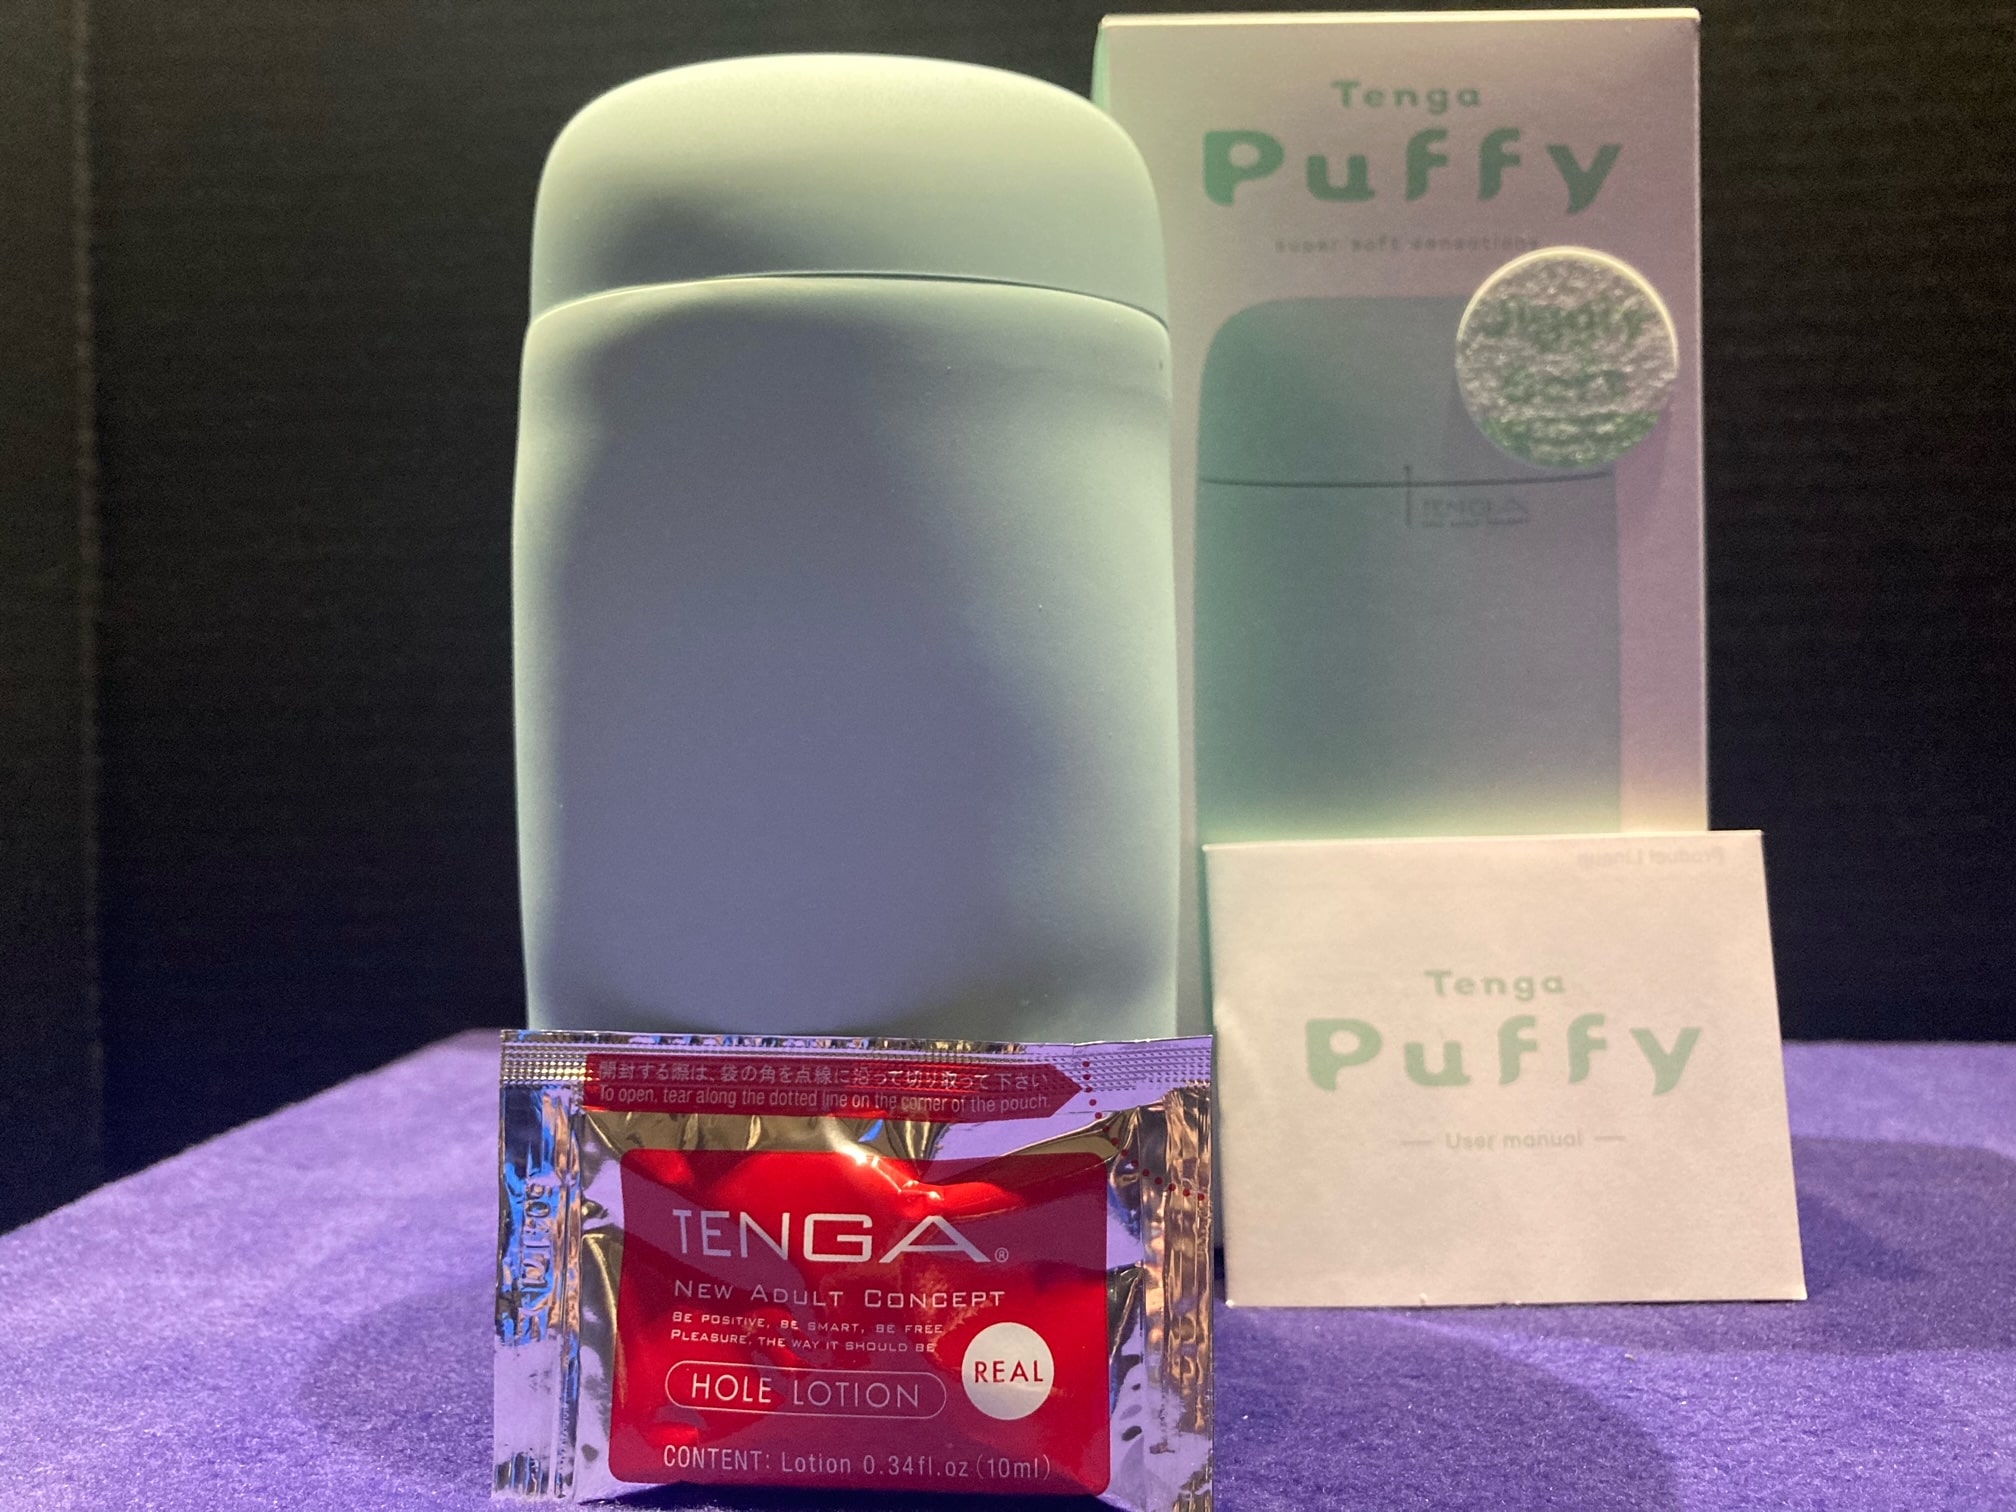 Tenga Puffy Unwrapping the Tenga Puffy: A Look at the Packaging